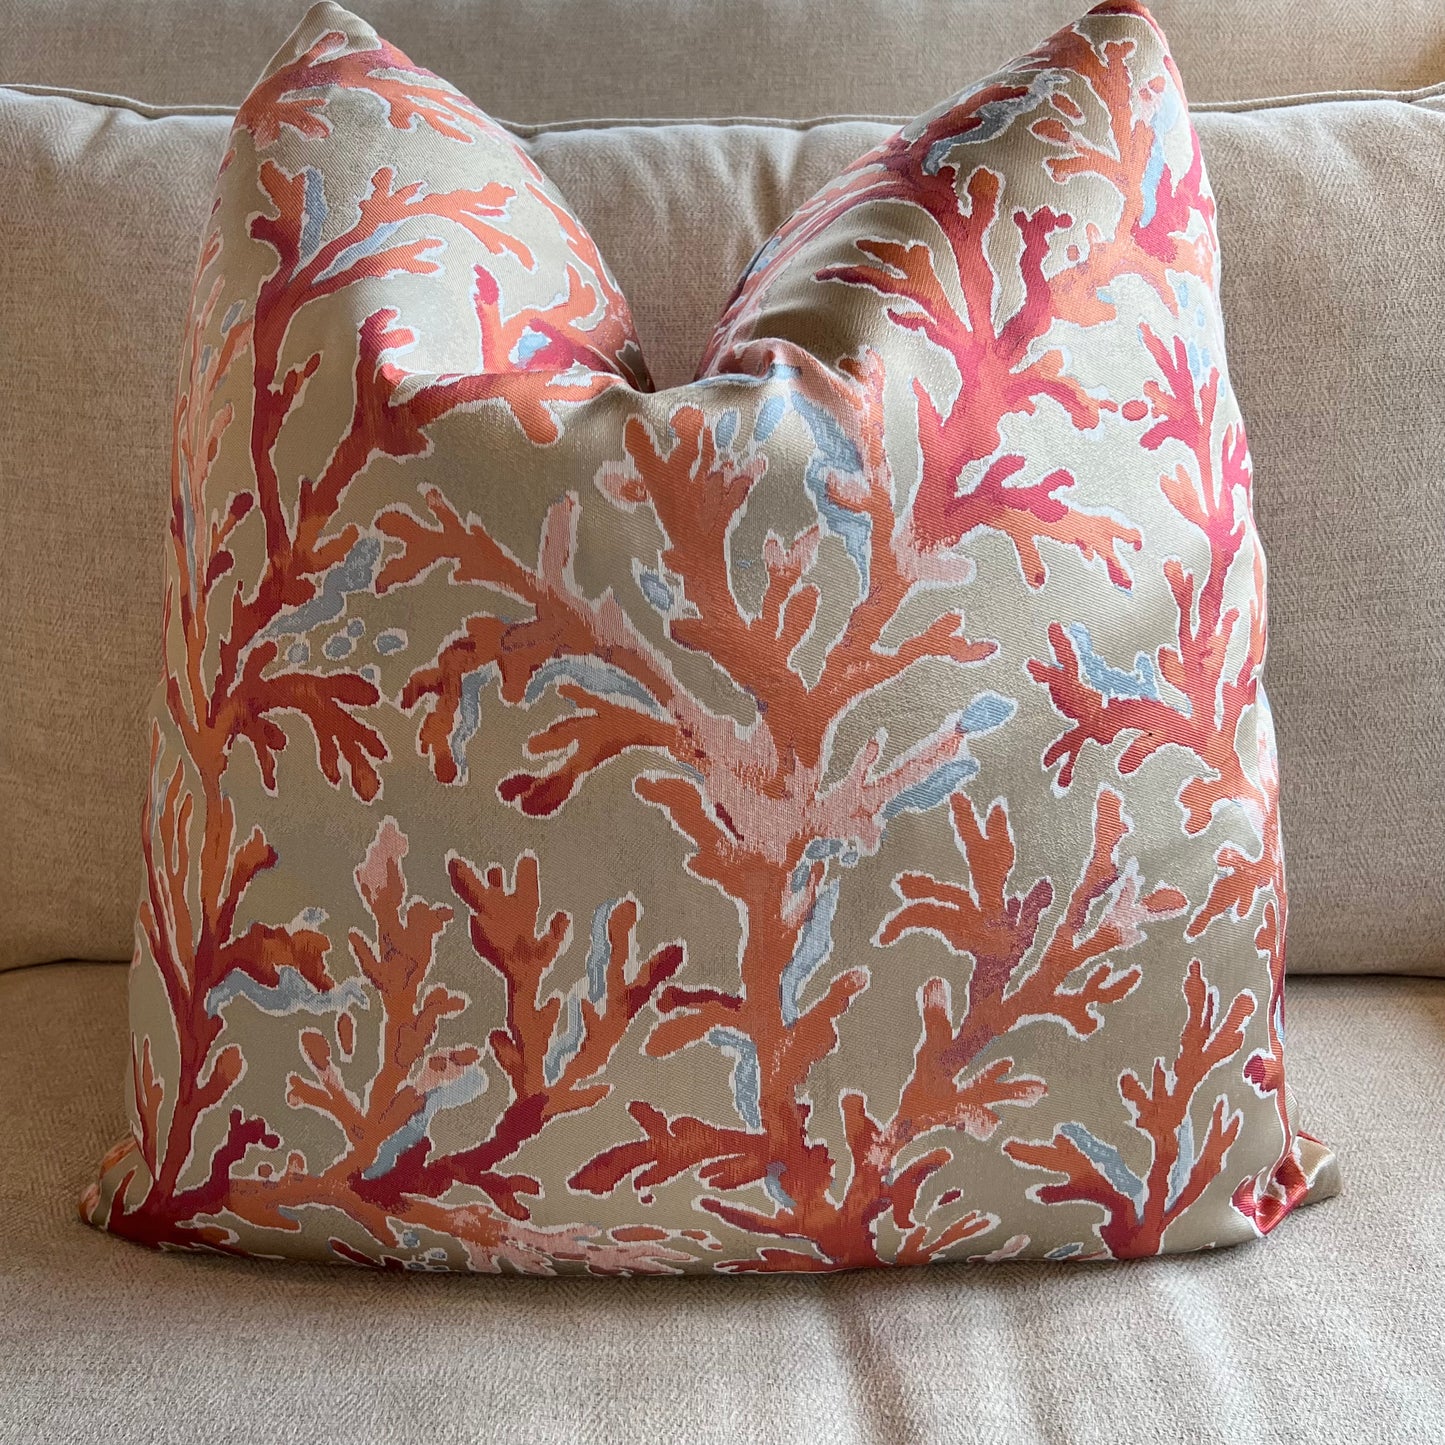 Watercolor Coral on Tan Fabric Pillow